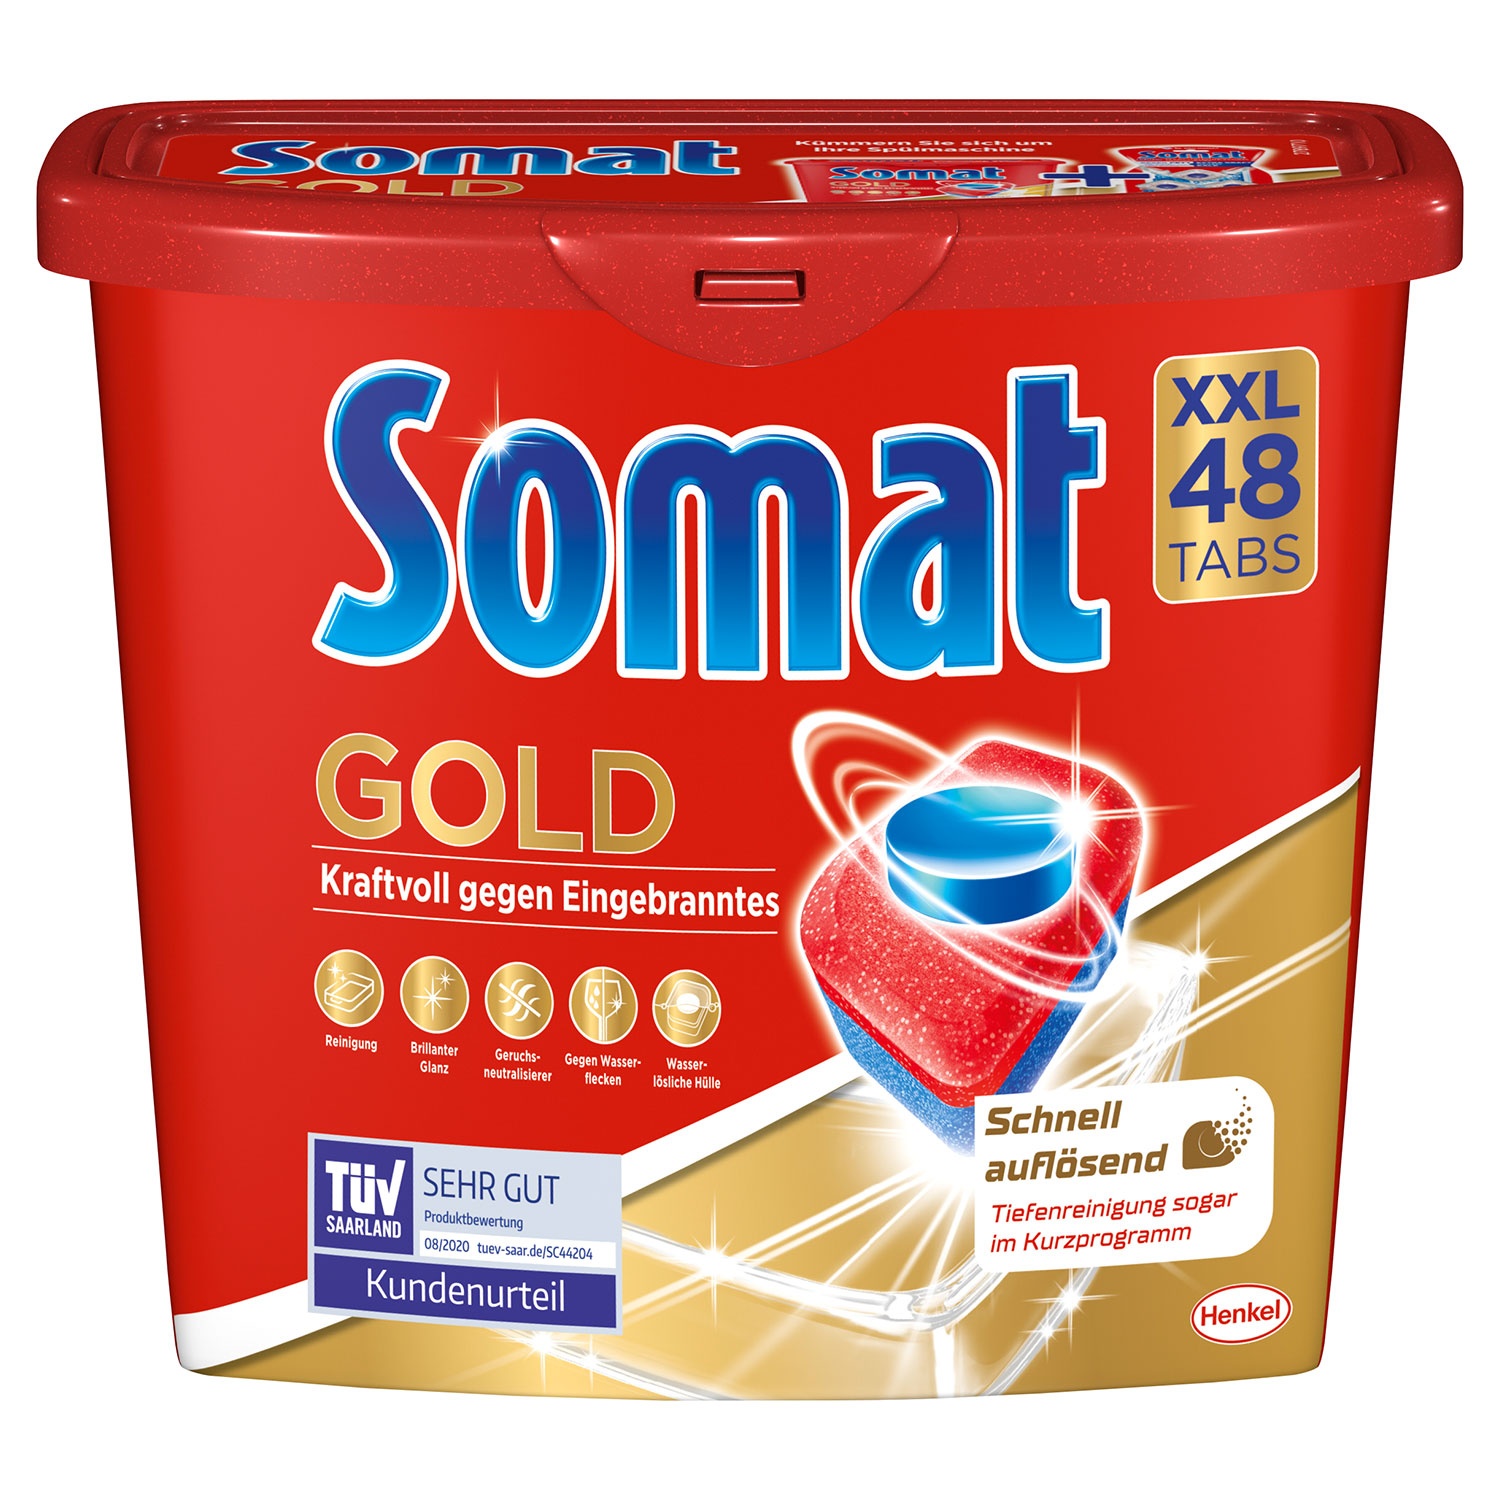 SOMAT Tabs Gold, XXL-Packung 48 Tabs